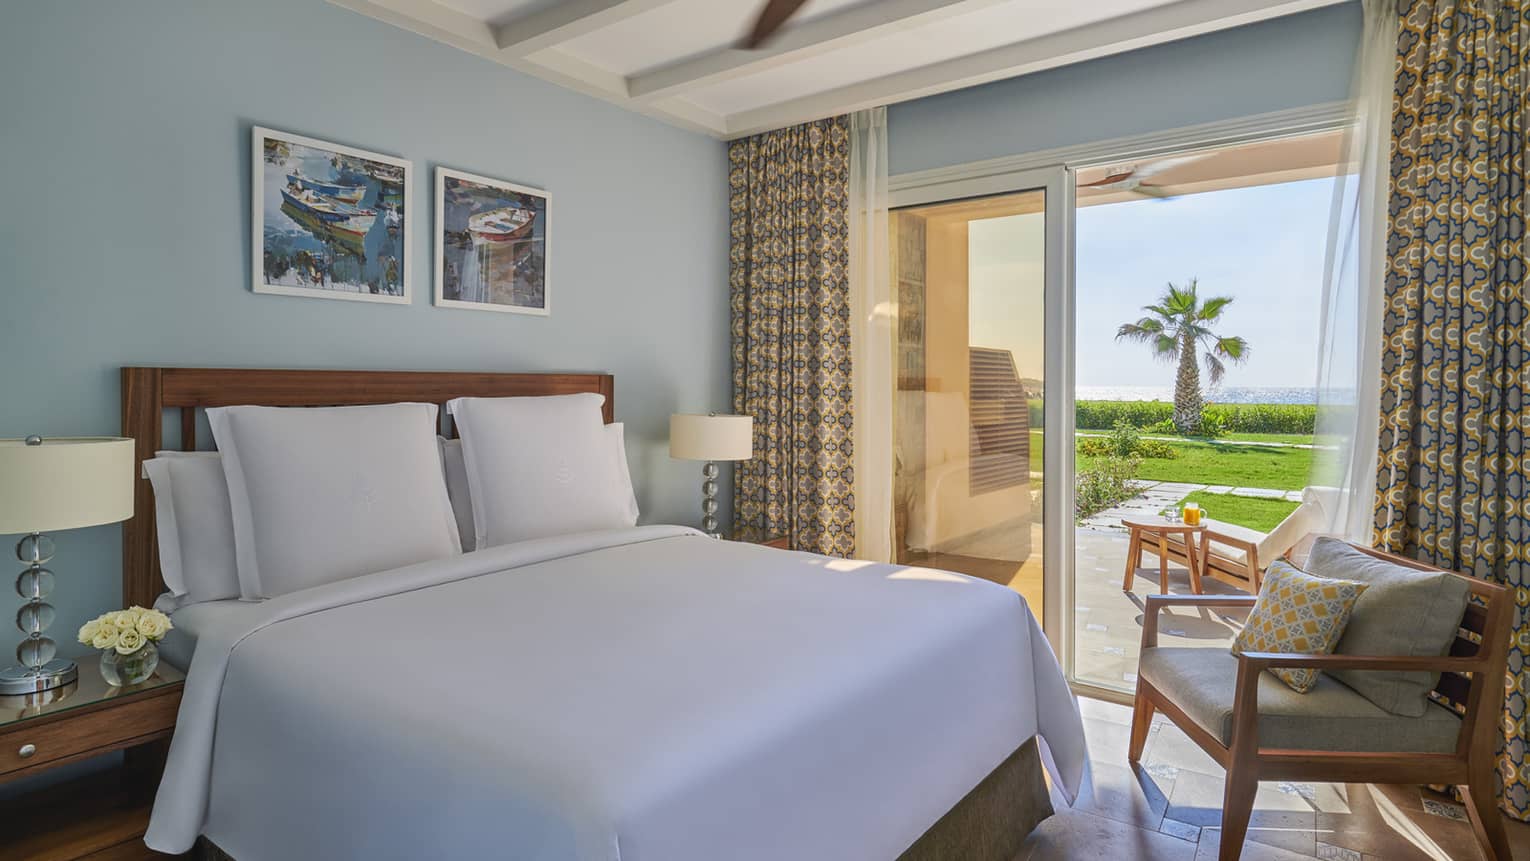 A freshly-made bed in the beach suite overlooking the marsh